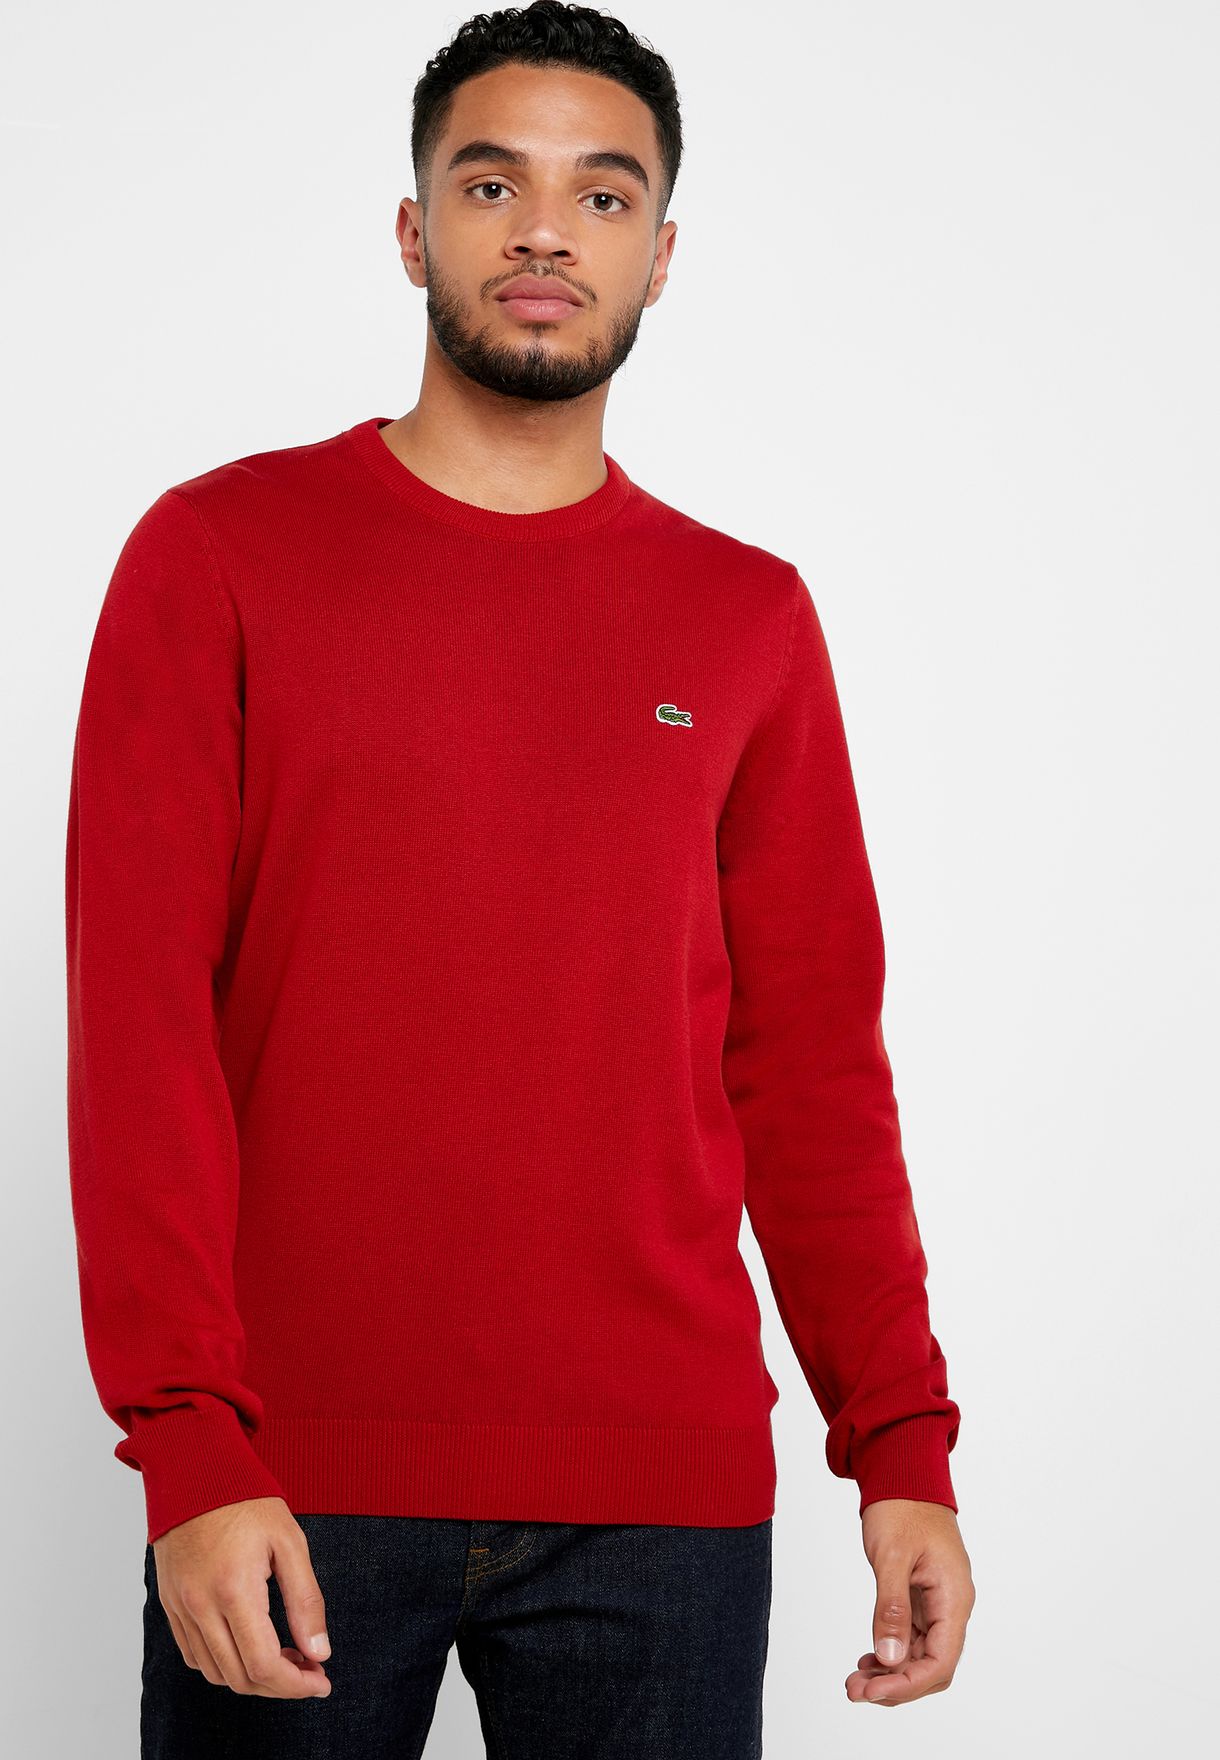 lacoste red sweater